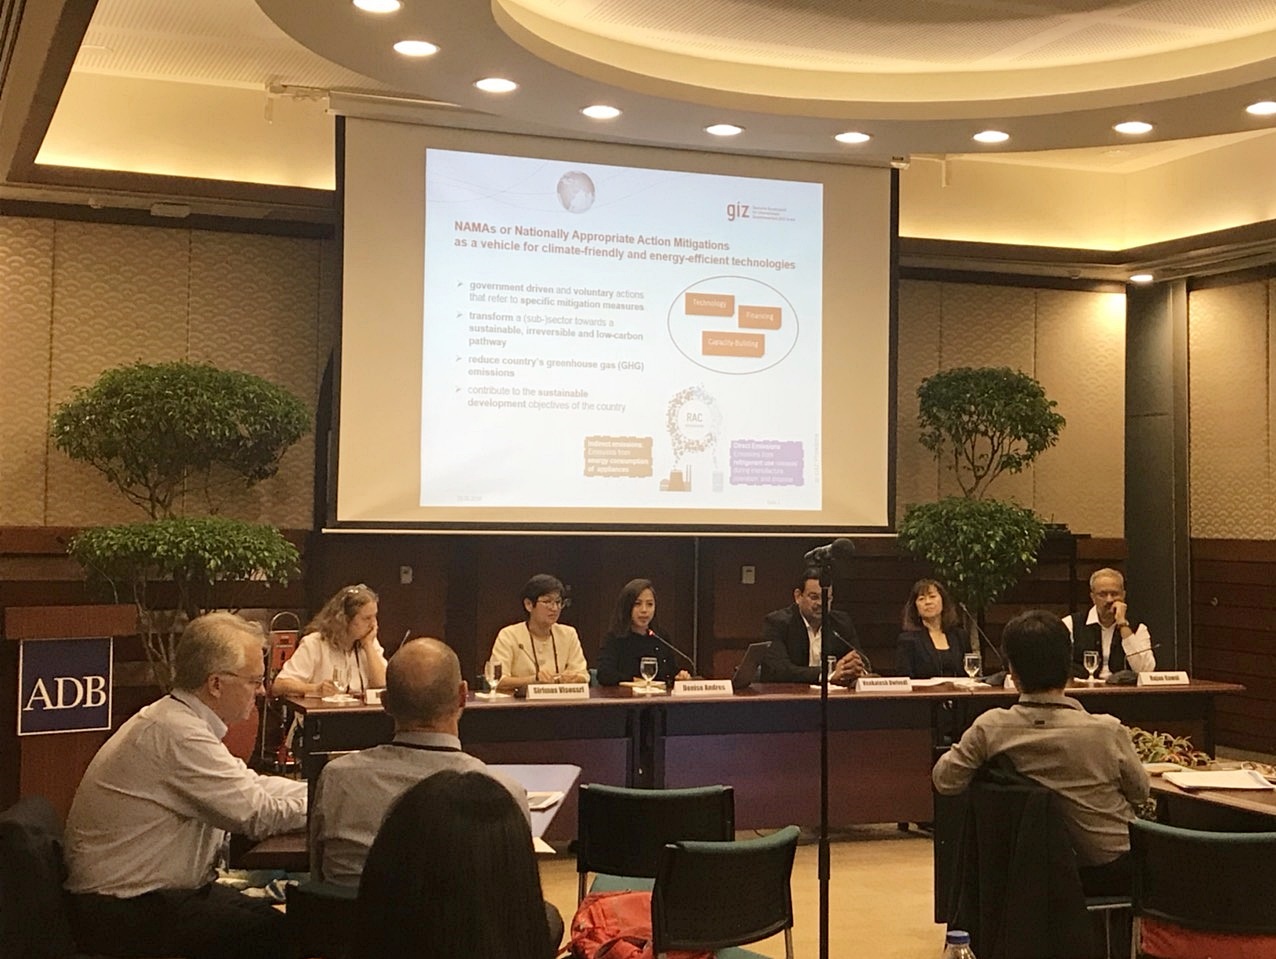 A representative from the Project Fund Manager (PFM) team of the RAC NAMA Fund and Ms. Denise Andres, adviser with the GIZ programme Proklima, attended a Deep Dive Workshop on June 5 on the topic “Promoting Efficient, Clean Cooling through Technology and Policy Innovation” as part of the Asia Clean Energy Forum (ACEF) 2018.